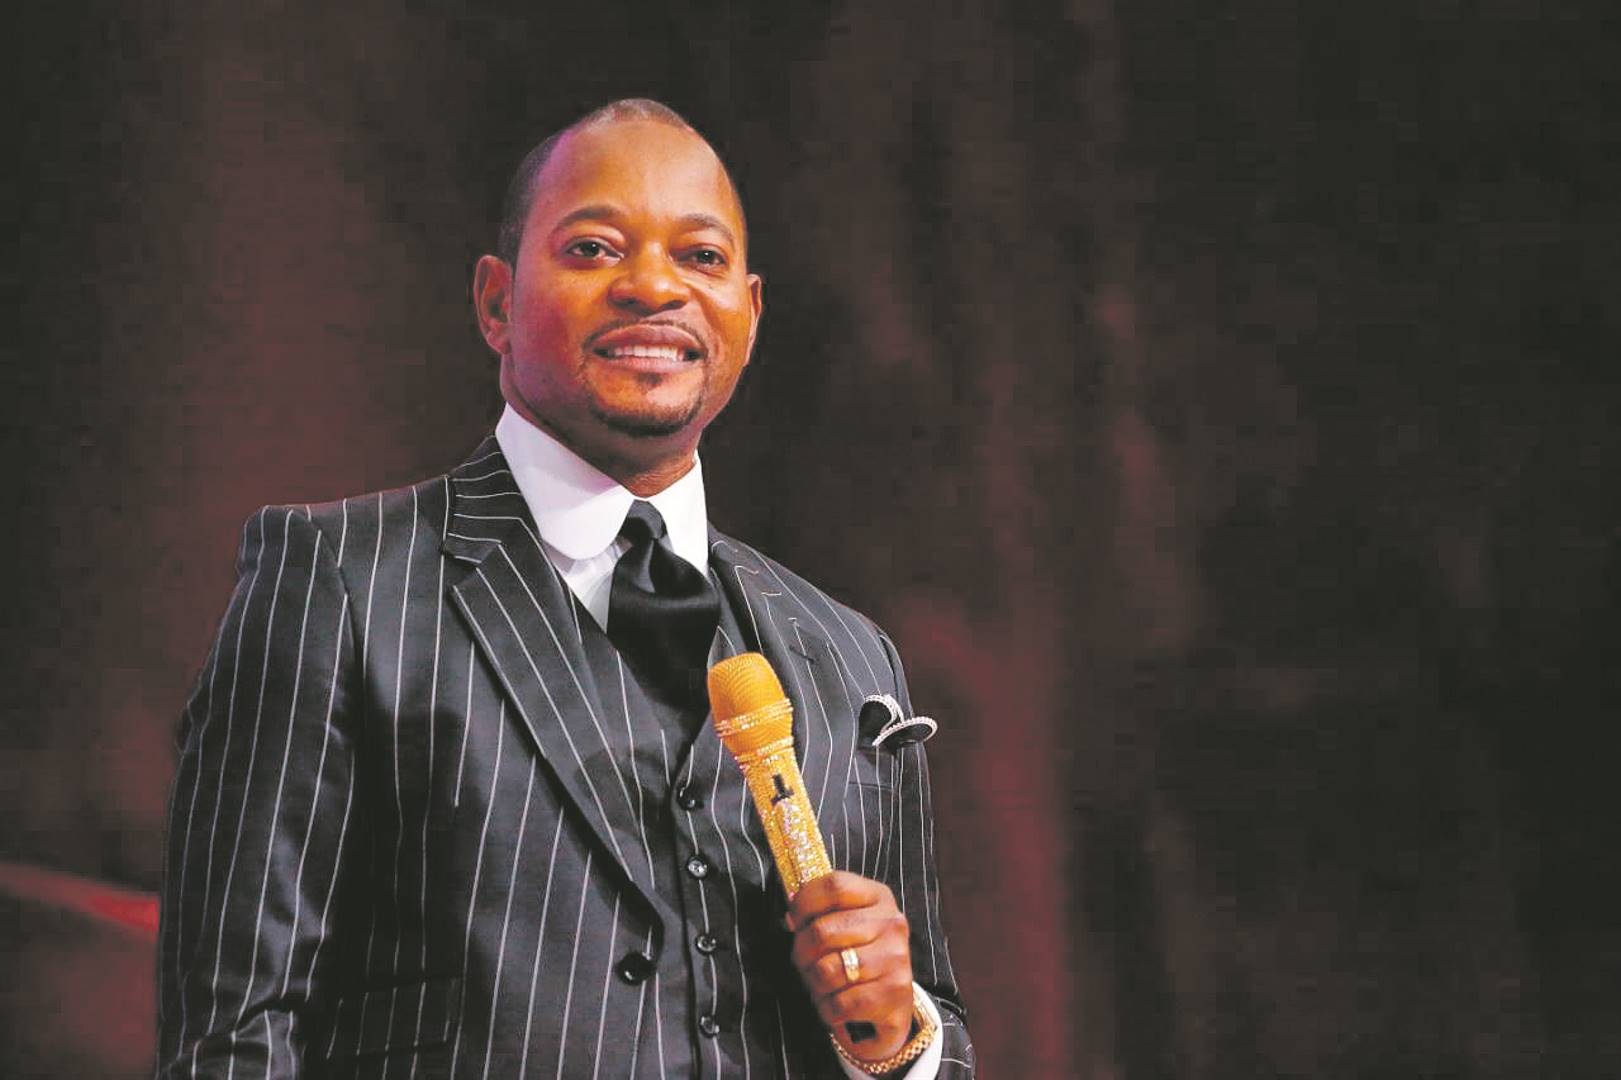 Alph Lukau and wife Celeste were served with letters of demand from Sars for over R20 million outstanding tax.